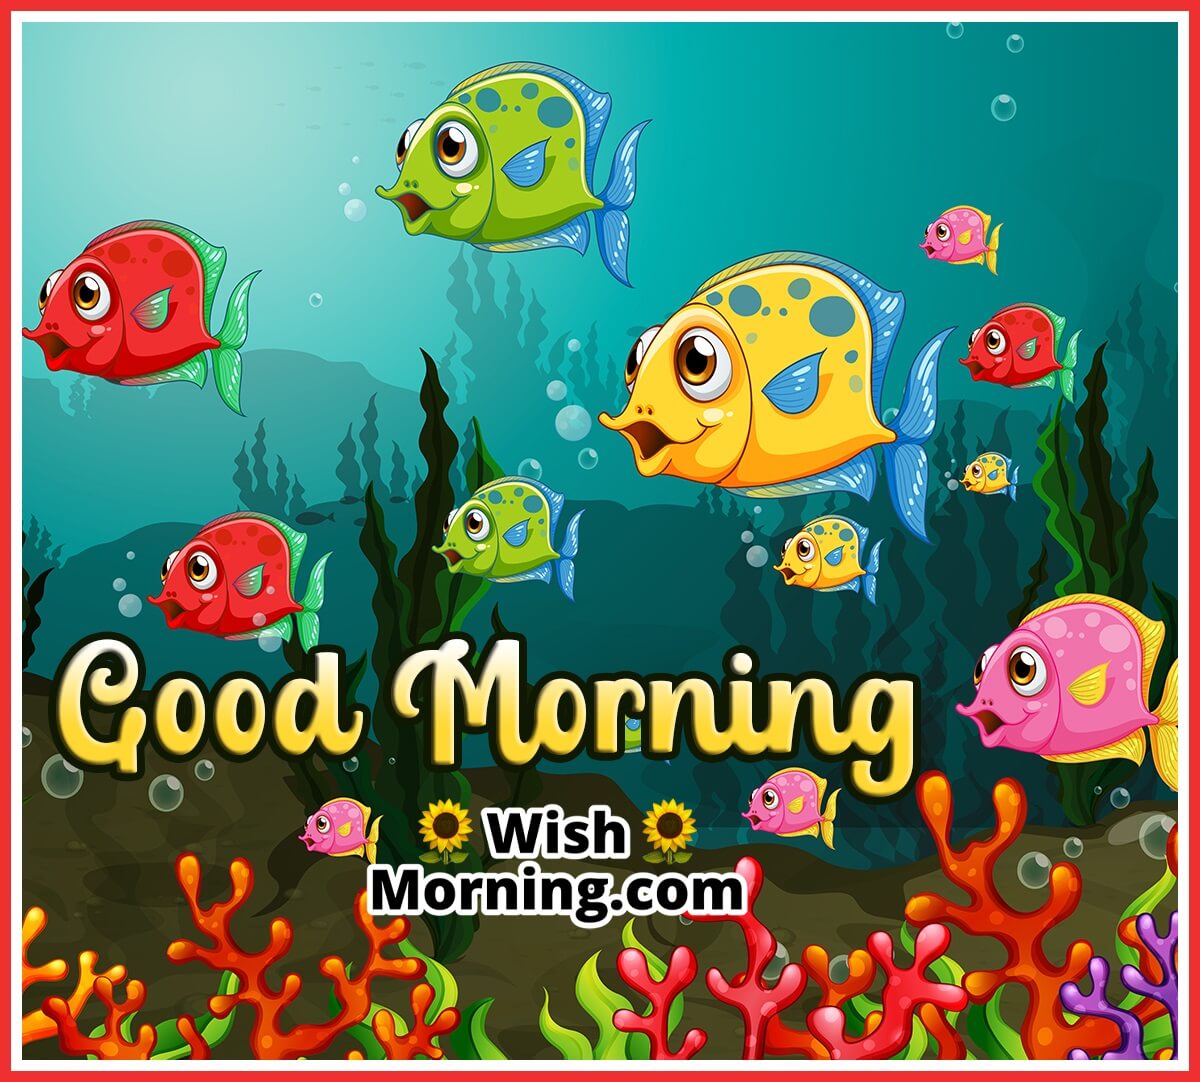 Many Exotic Fishes Cartoon Character In The Underwater Scene Wit